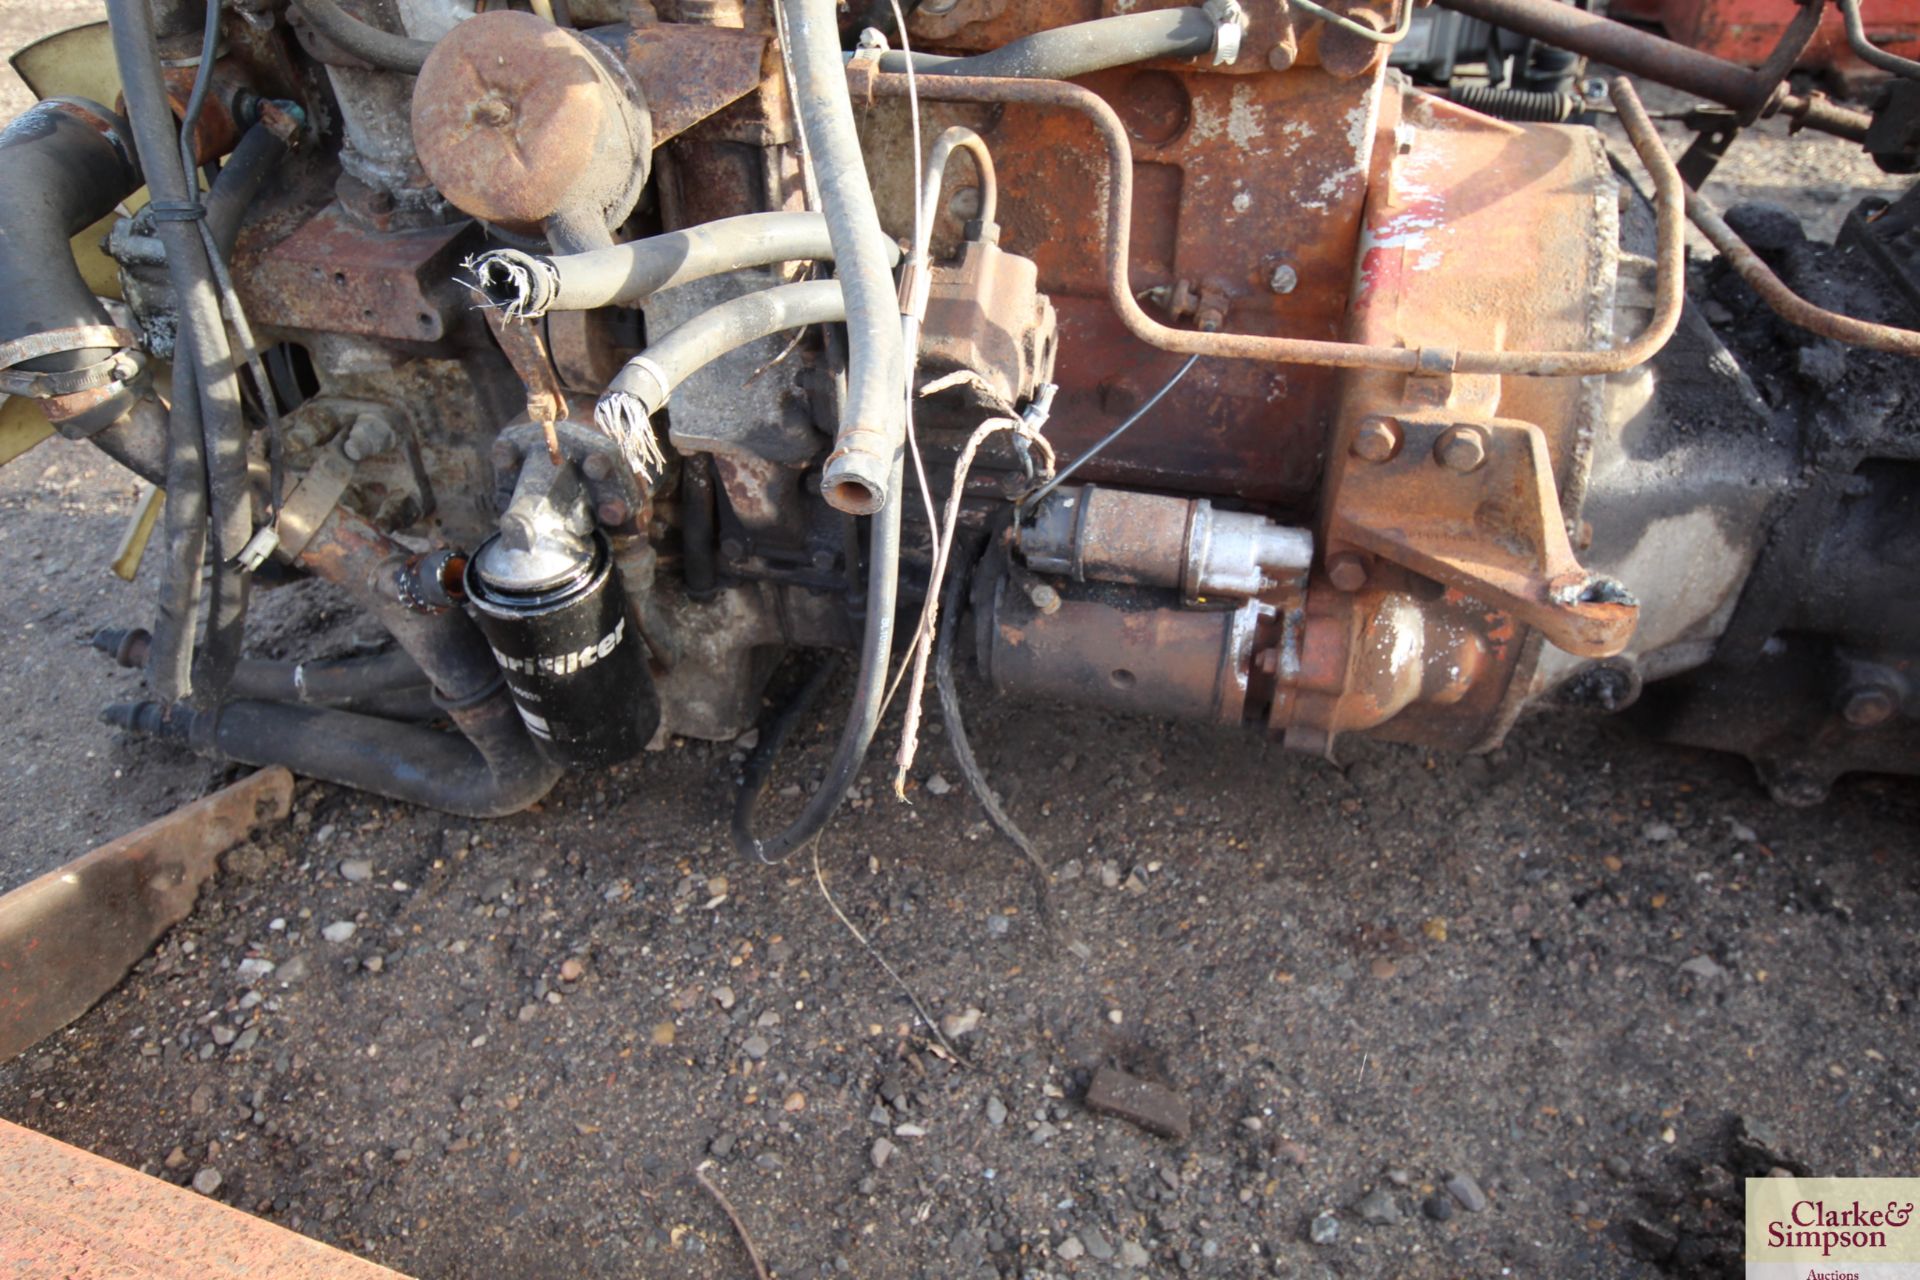 Perkins dot4 6cyl engine and gearbox. V - Image 9 of 9